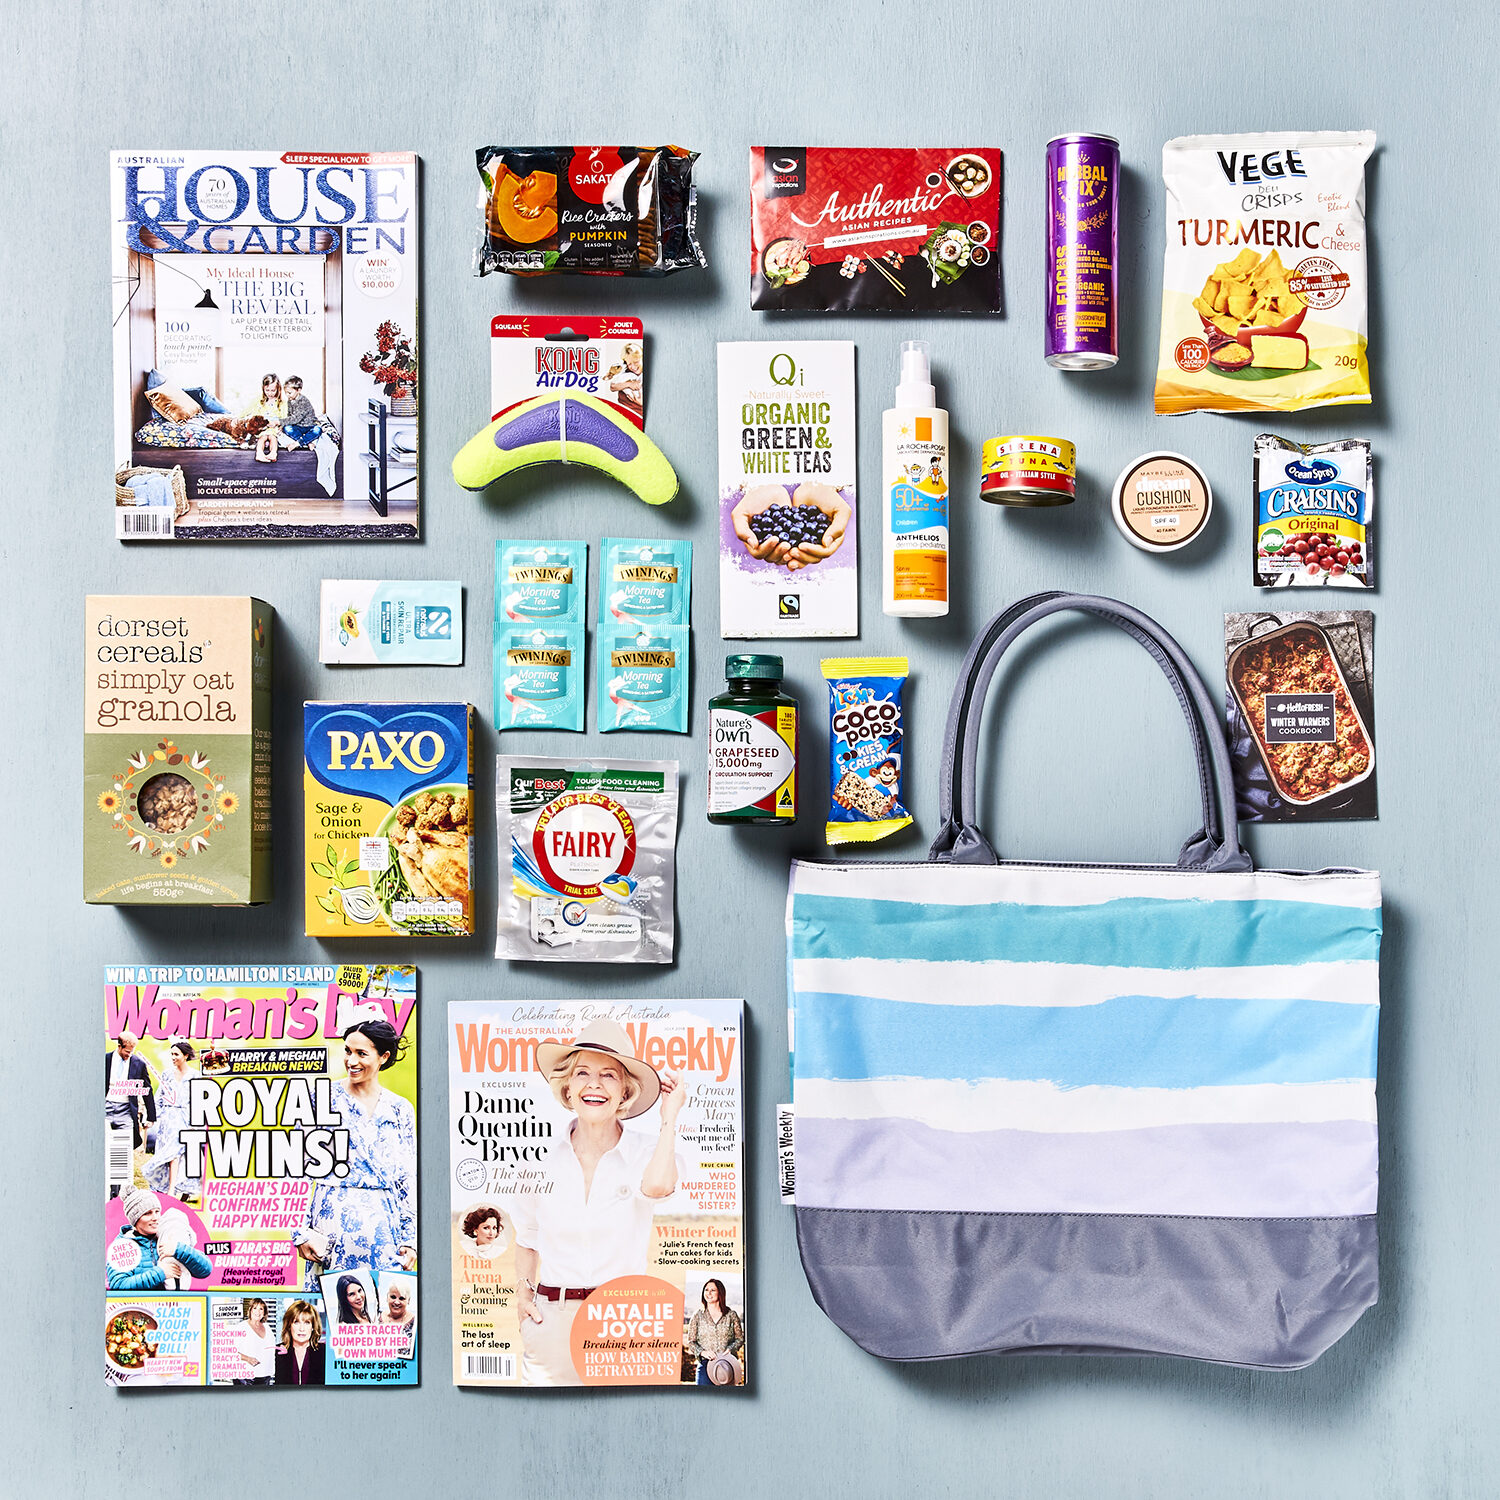 The classic Australian Women's Weekly Showbag is a must-have for Aussie women. It's the perfect choice for FMCG and Home and Lifestyle brands looking to target primary grocer buyers and early adopters of new supermarket products. Get into their hands and their hearts by participating in the Australian Women's Weekly Showbag with Chicane Marketing.